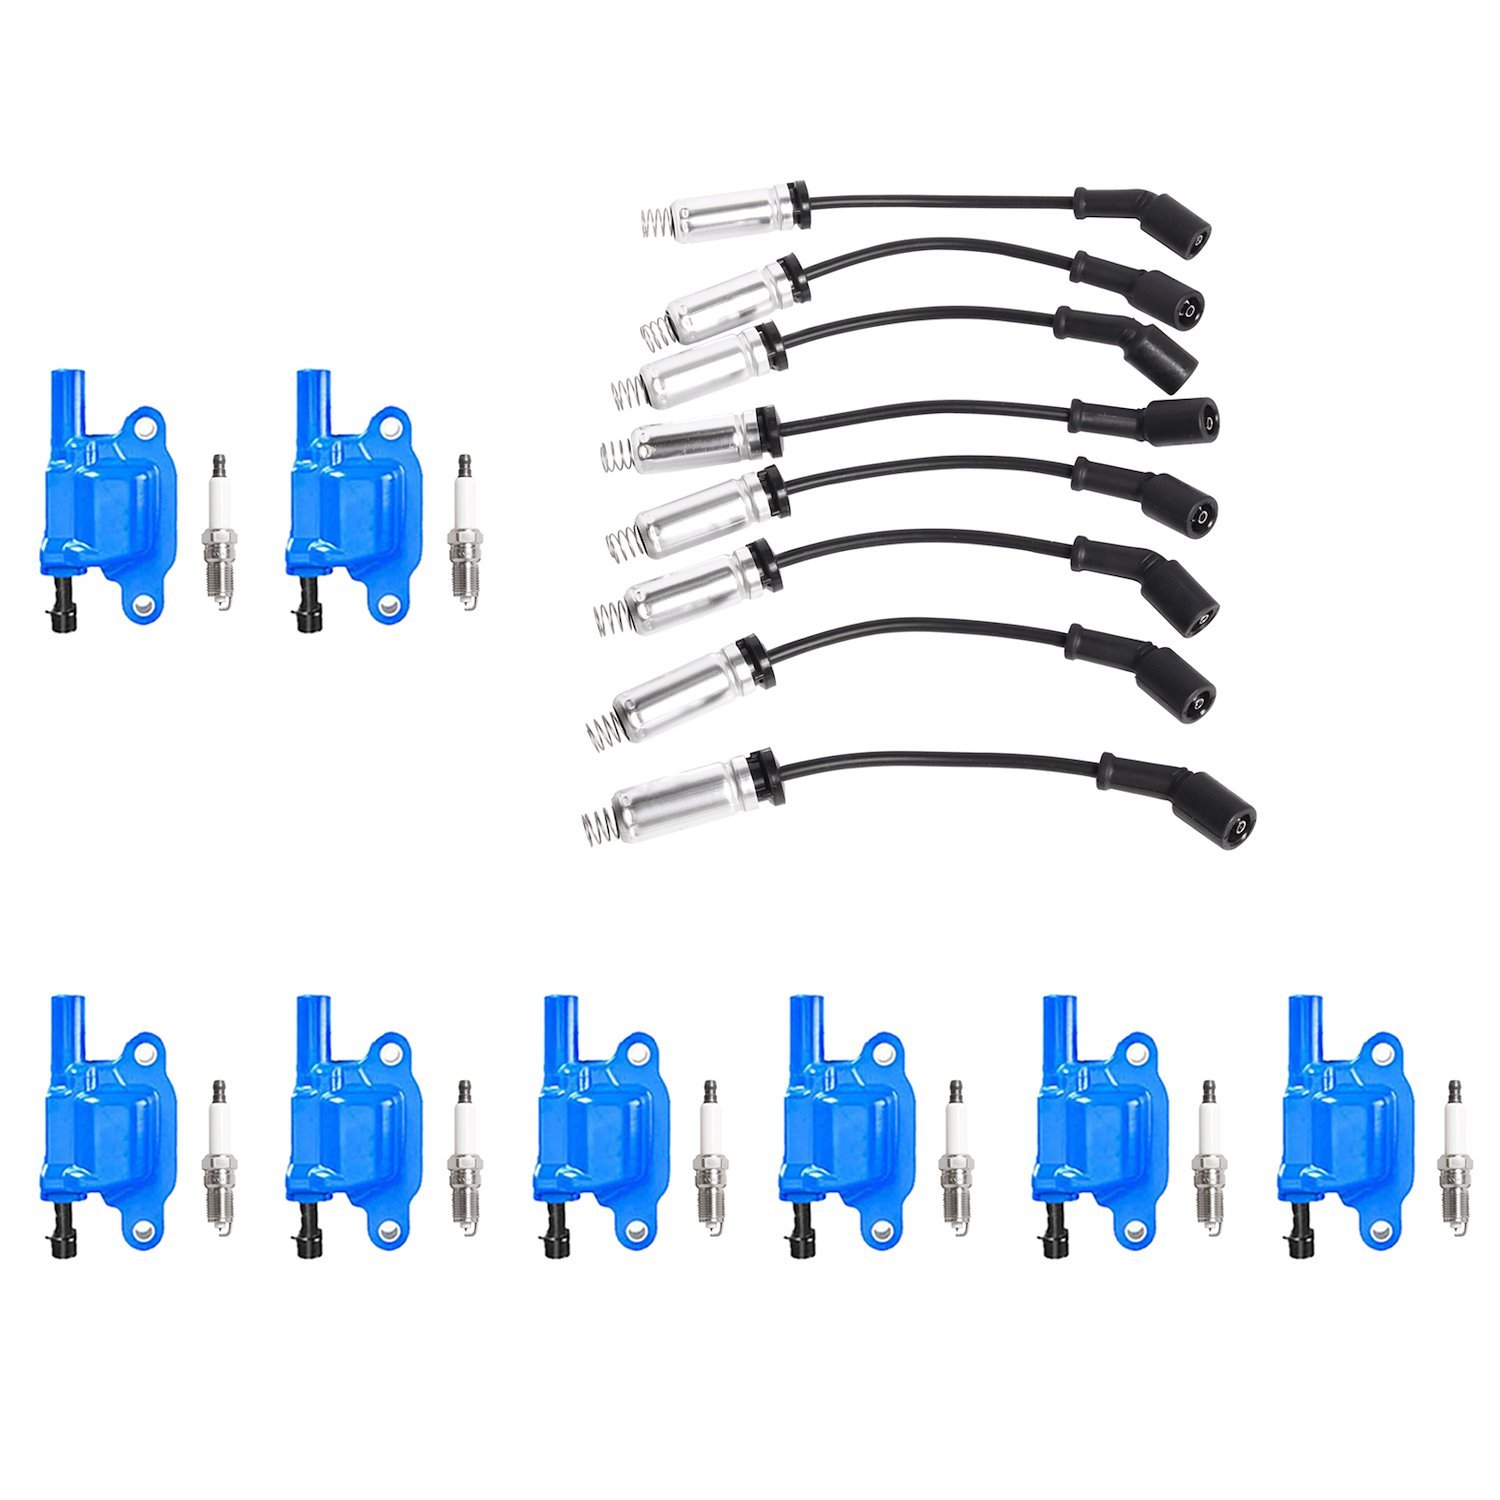 High-Performance Ignition Coil, Spark Plug, and Spark Plug Wire Kit for GM 5.3L/6.0/6.2L